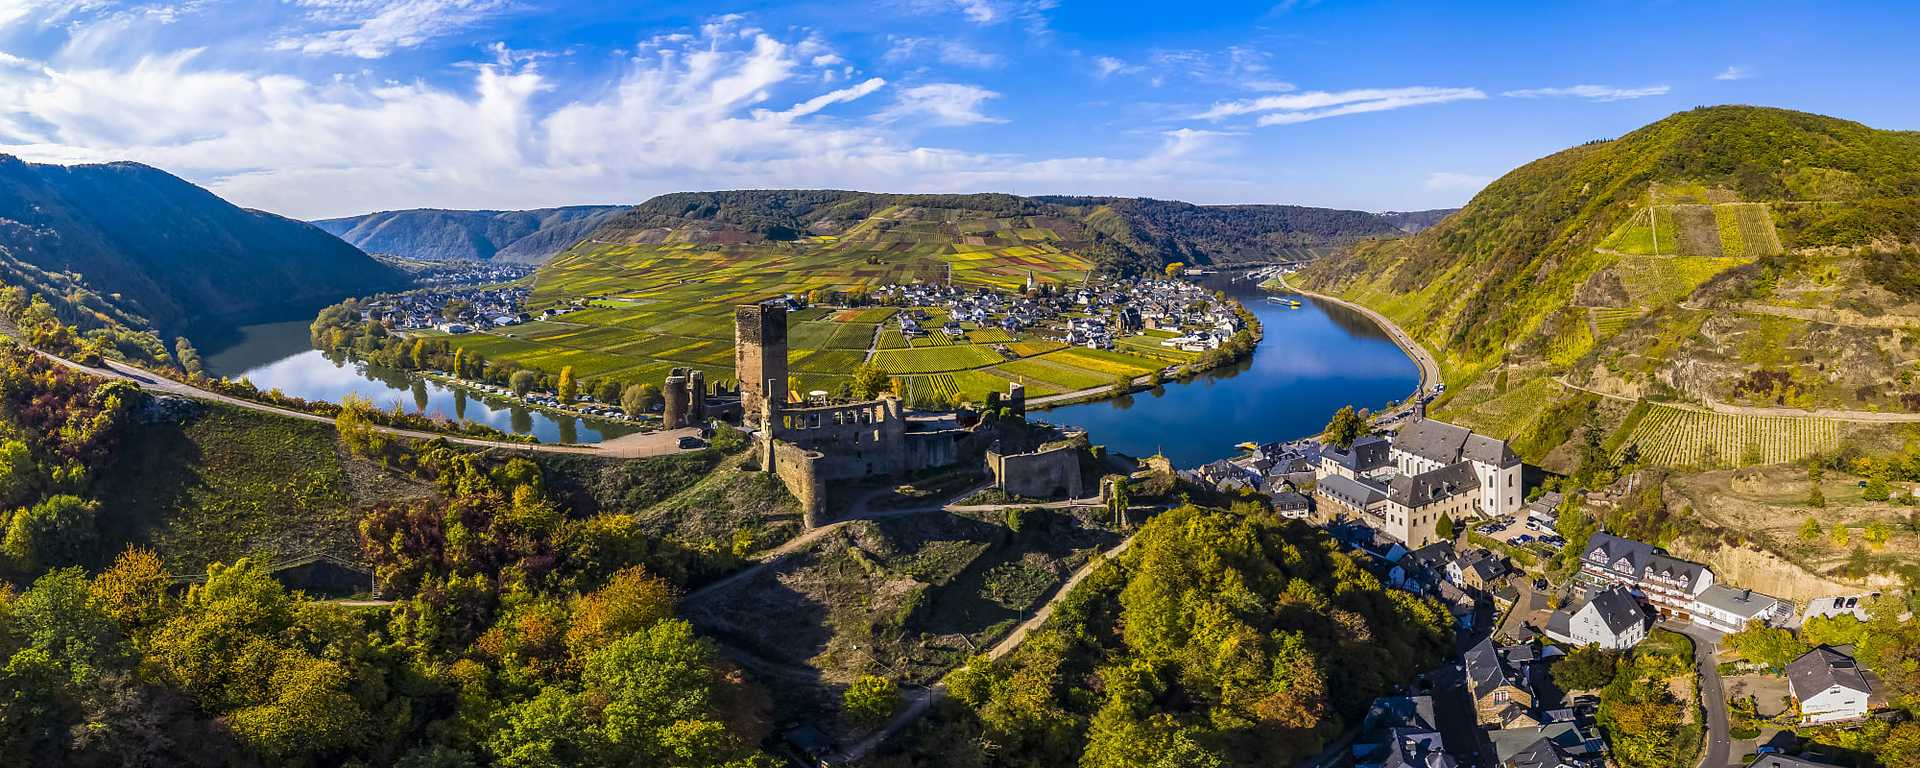 Vineyards and castle along the Moselle river in Poltersdor in the Cochem-Zell district in Rhineland-Palatinate, Germany